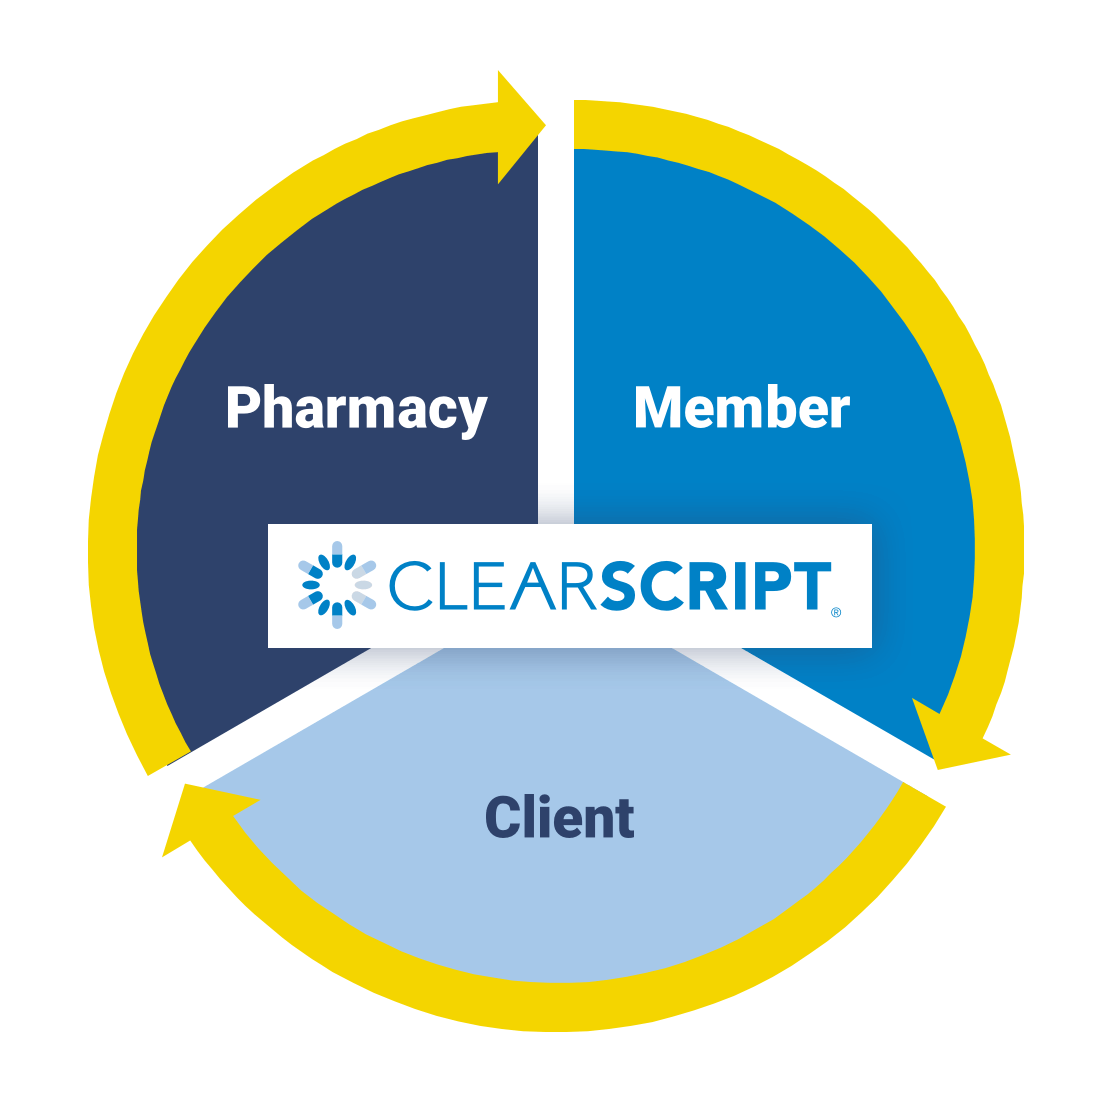 ClearScript's pharmacy benefit solutions for pharmacy, client, and member.